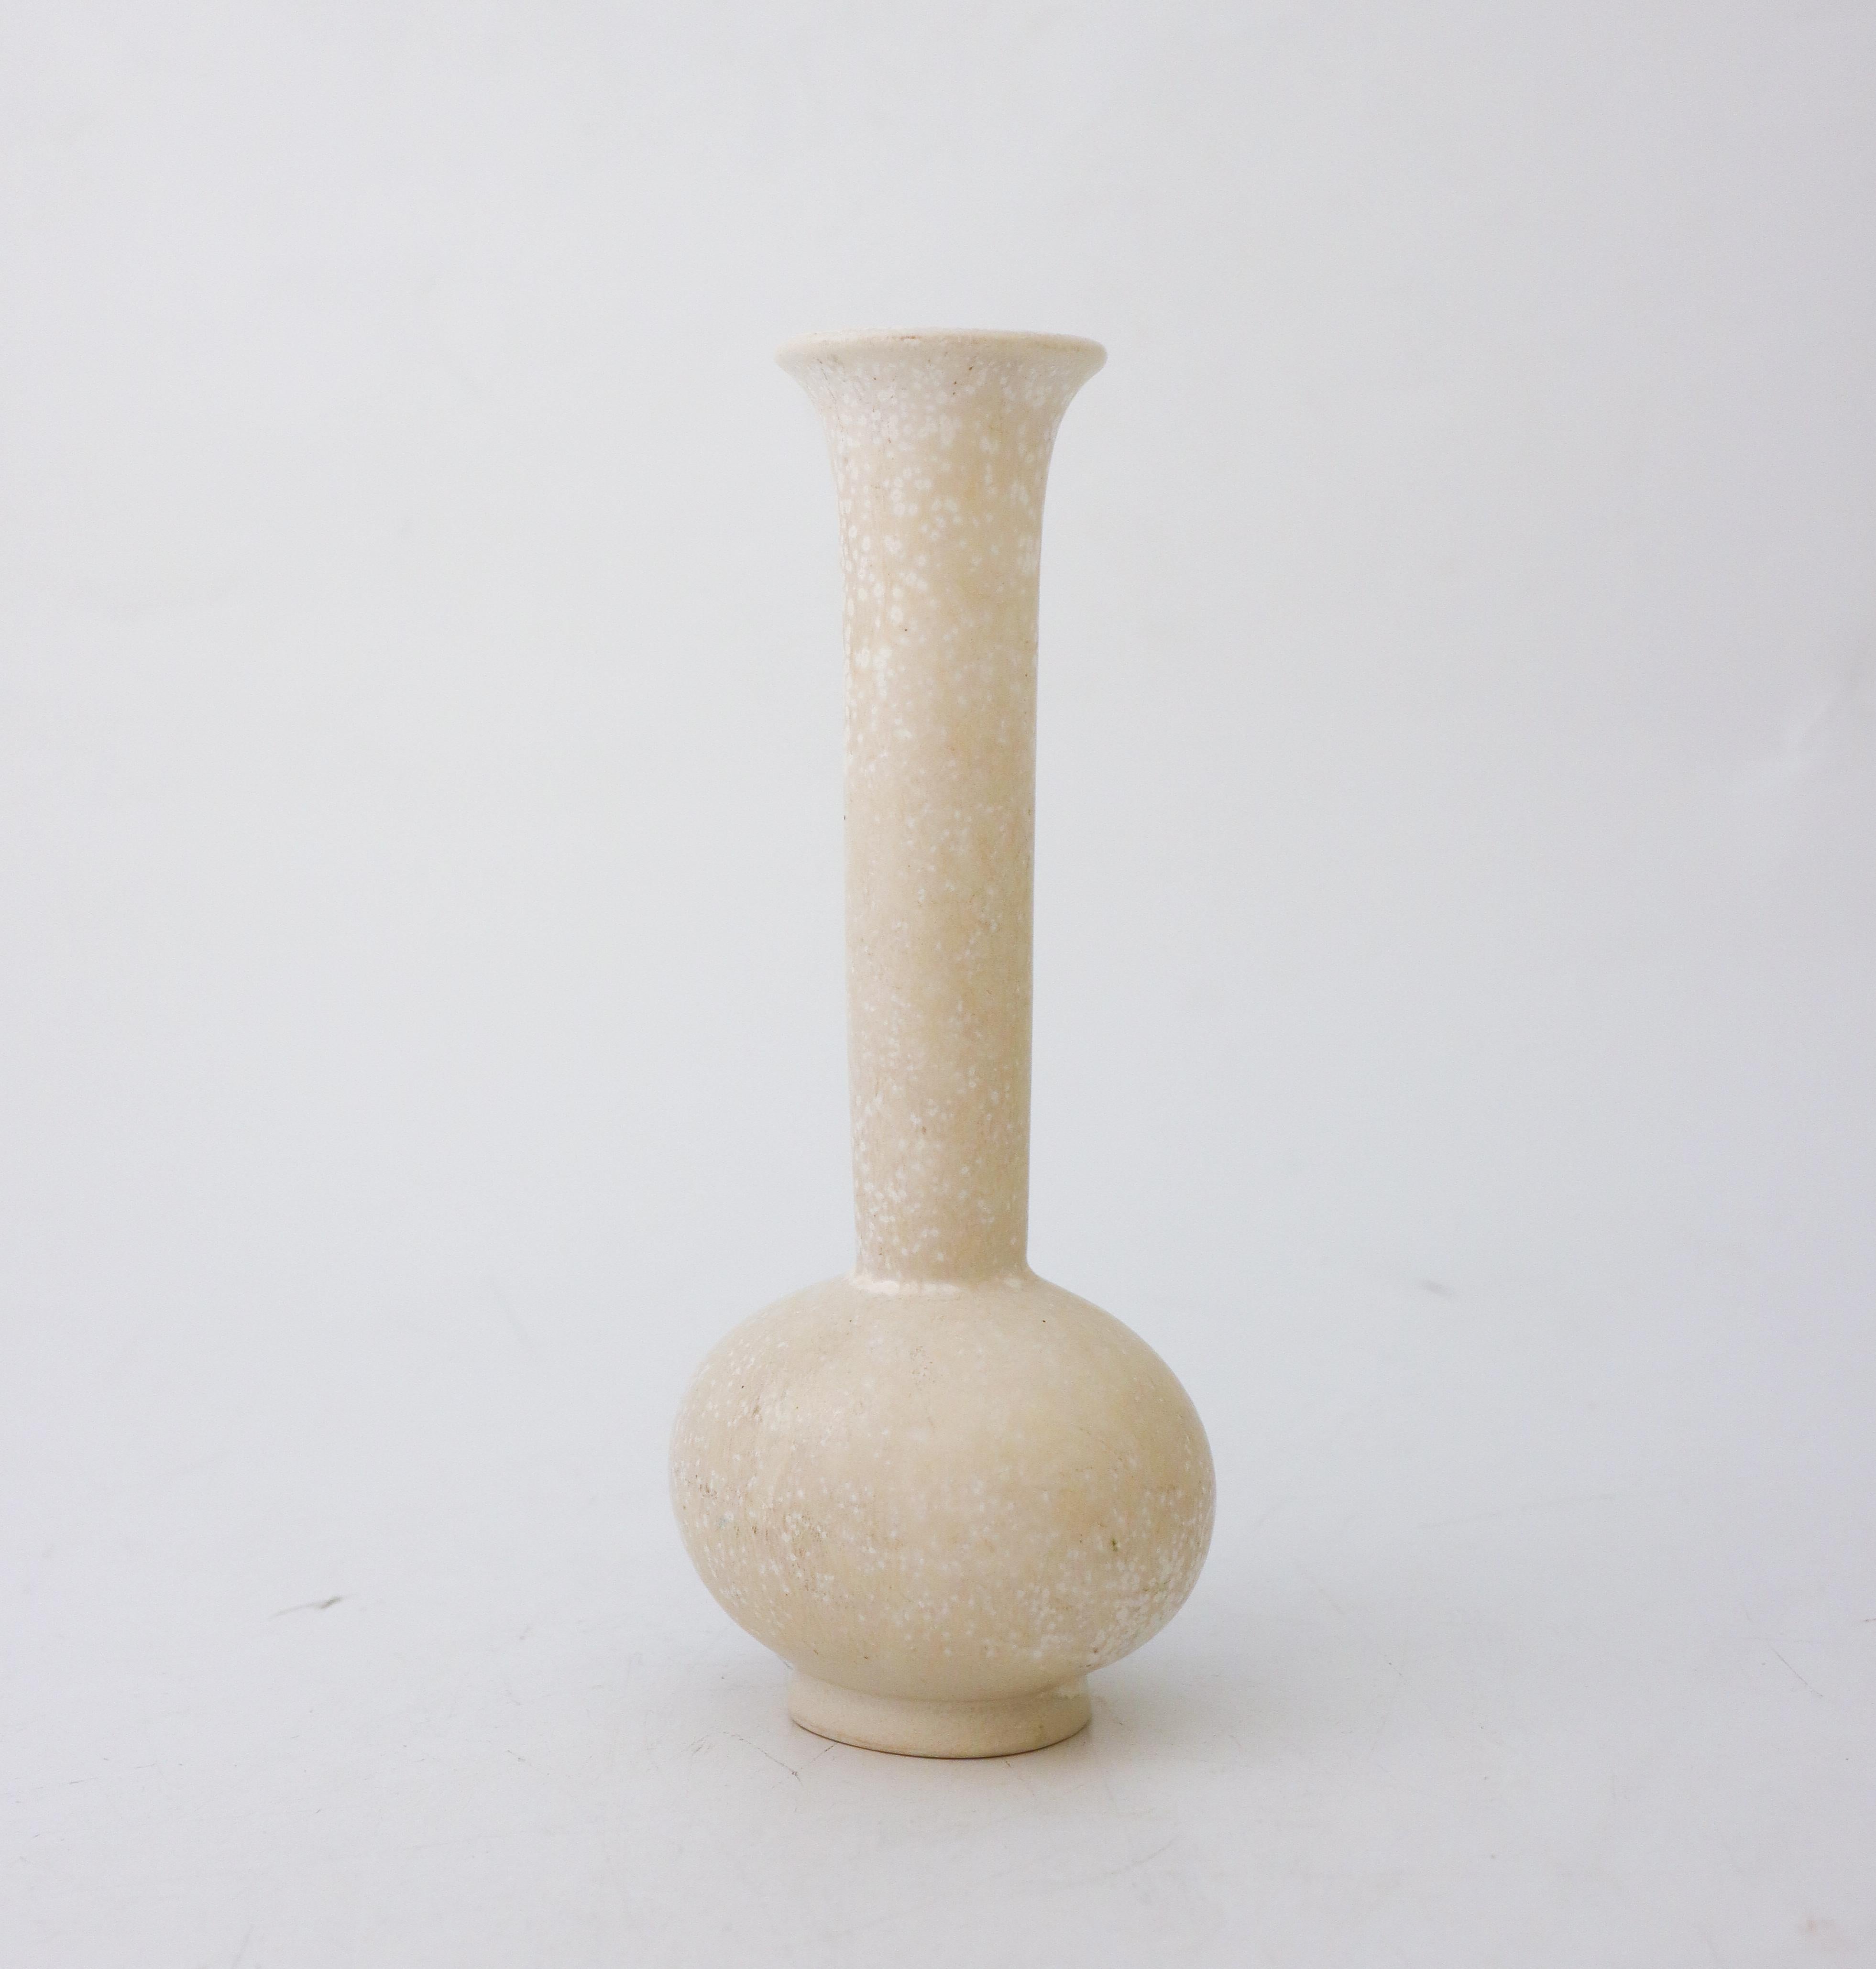 A lovely white speckled vase designed by Gunnar Nylund at Rörstrand, it´s 21 cm (8.4